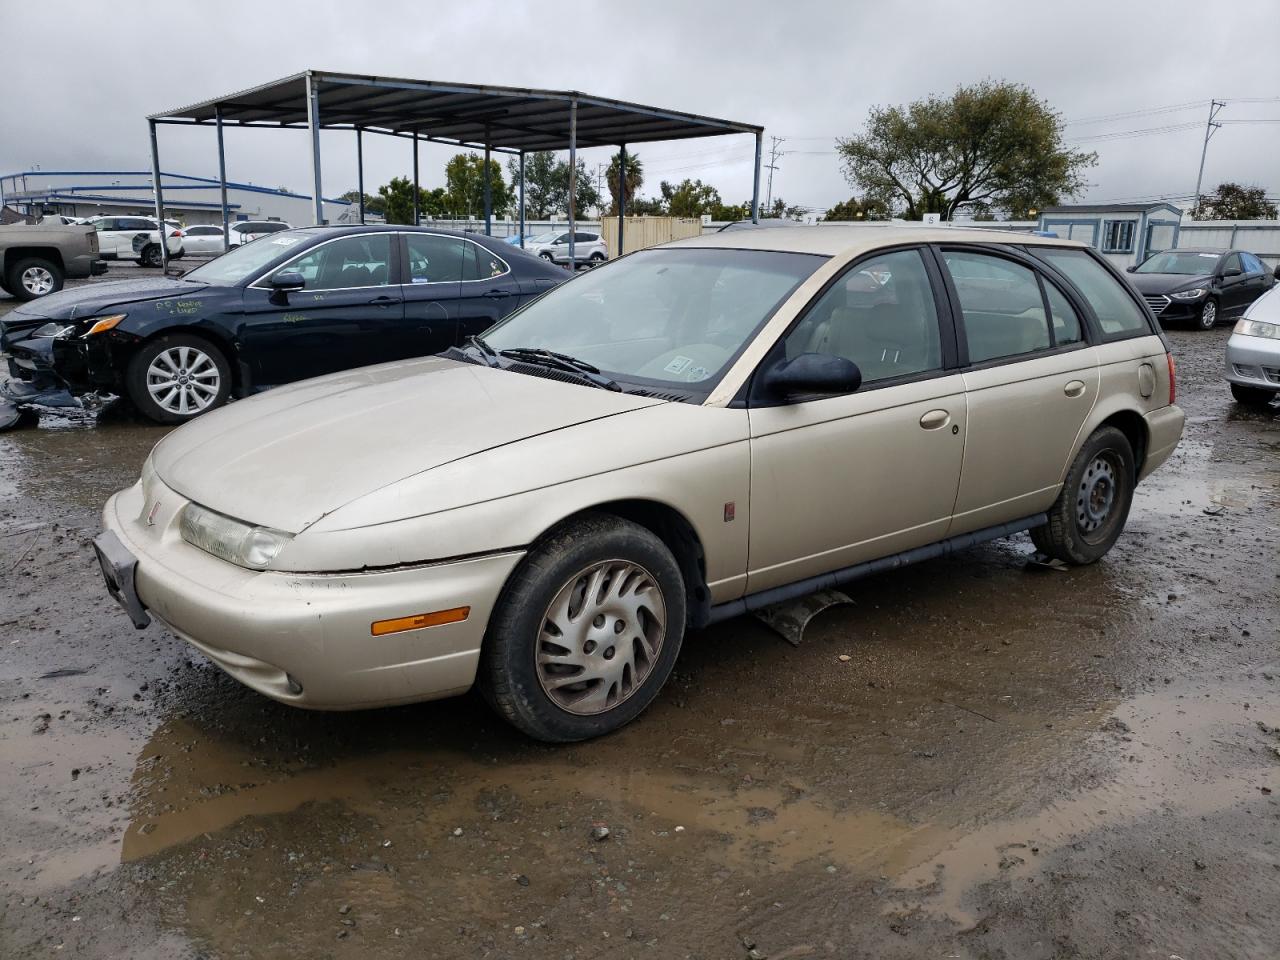 1998 Saturn SW2 for sale at Copart San Diego, CA. Lot #42457*** |  SalvageAutosAuction.com